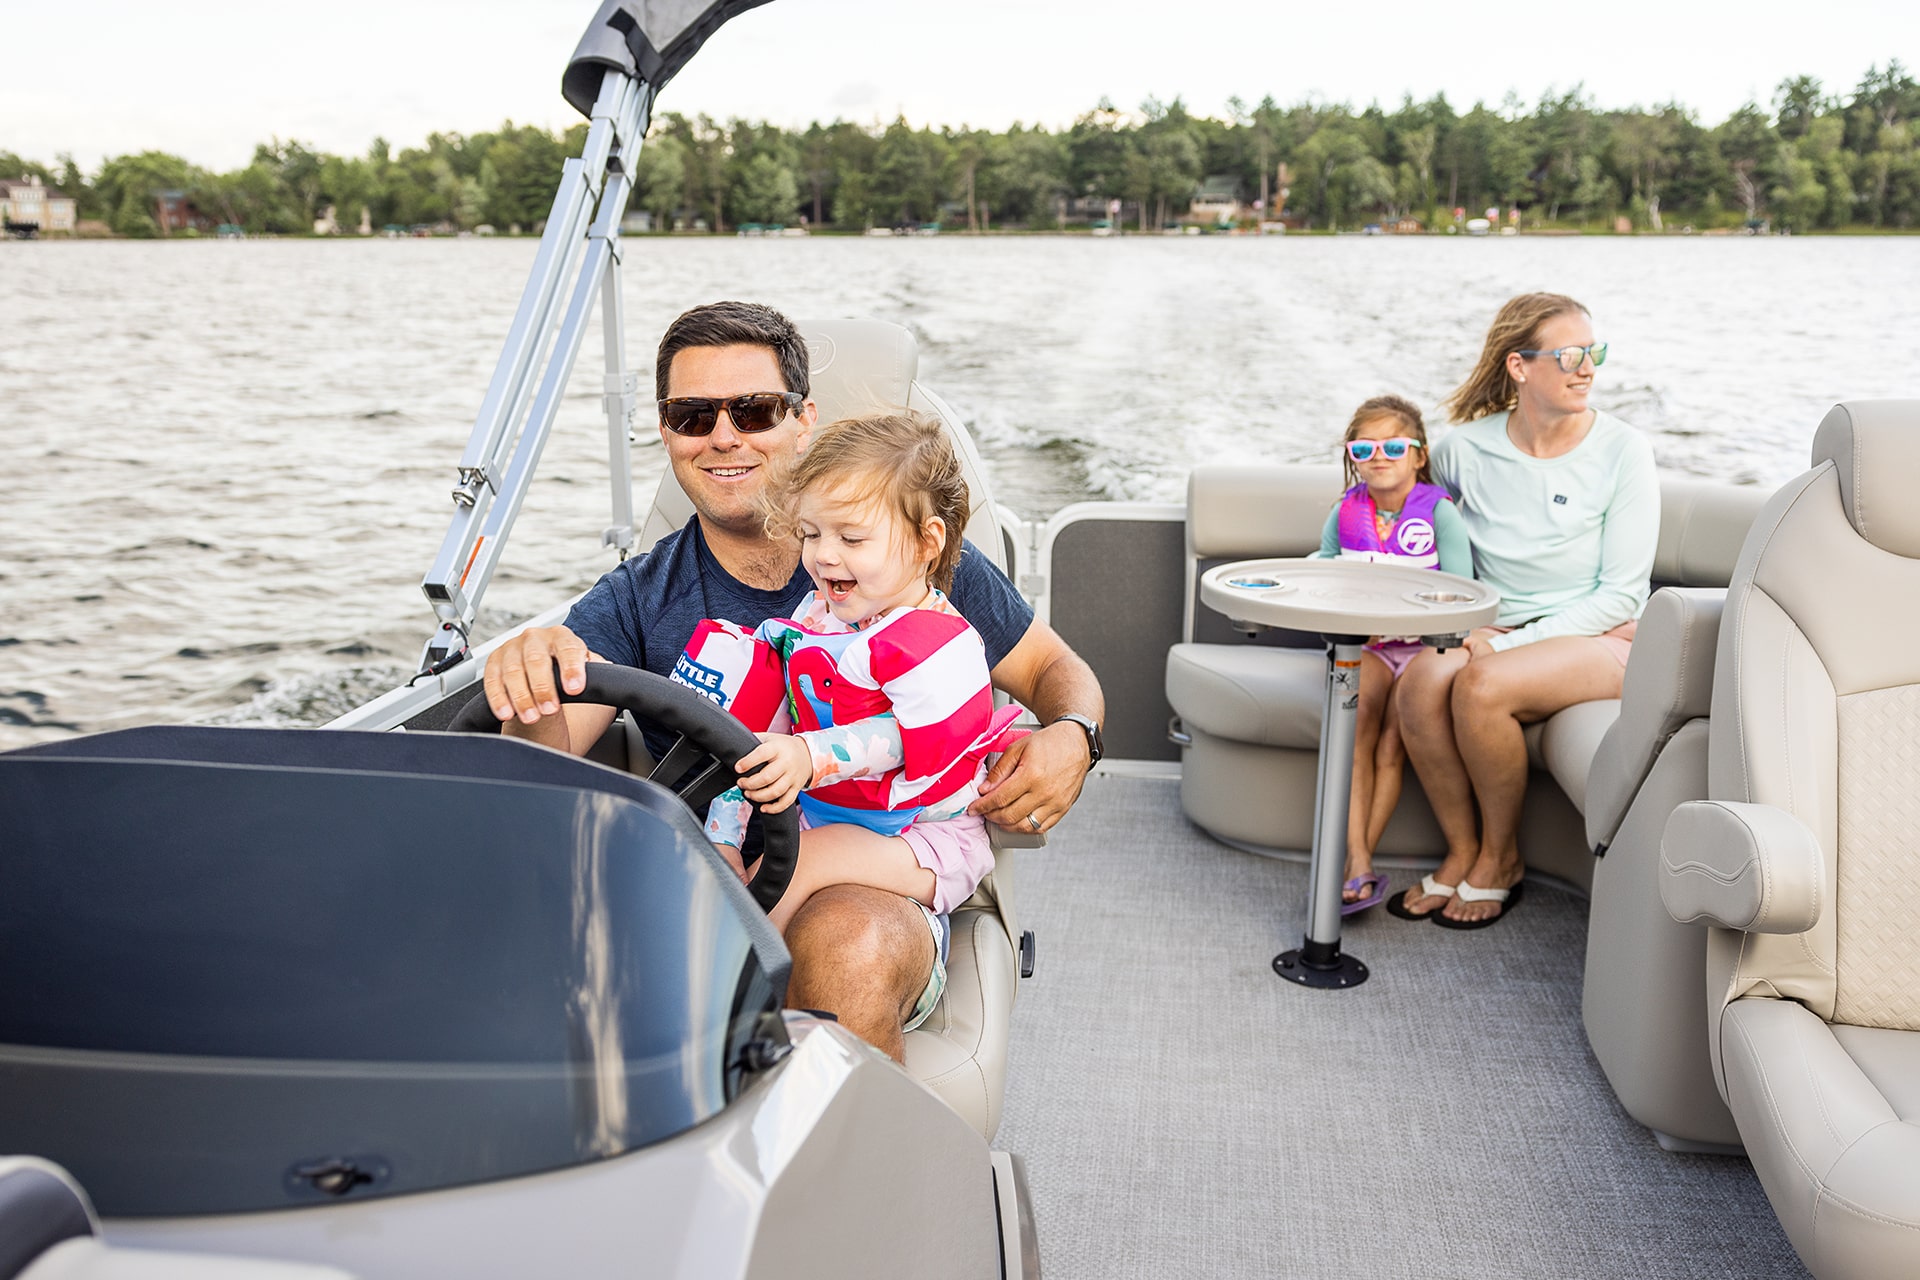 A head-on shot of a family driving a pontoon on a lake. The father is driving while one of the young girls is sitting on his lap. The mother and other young girl is sitting on seats in the back.